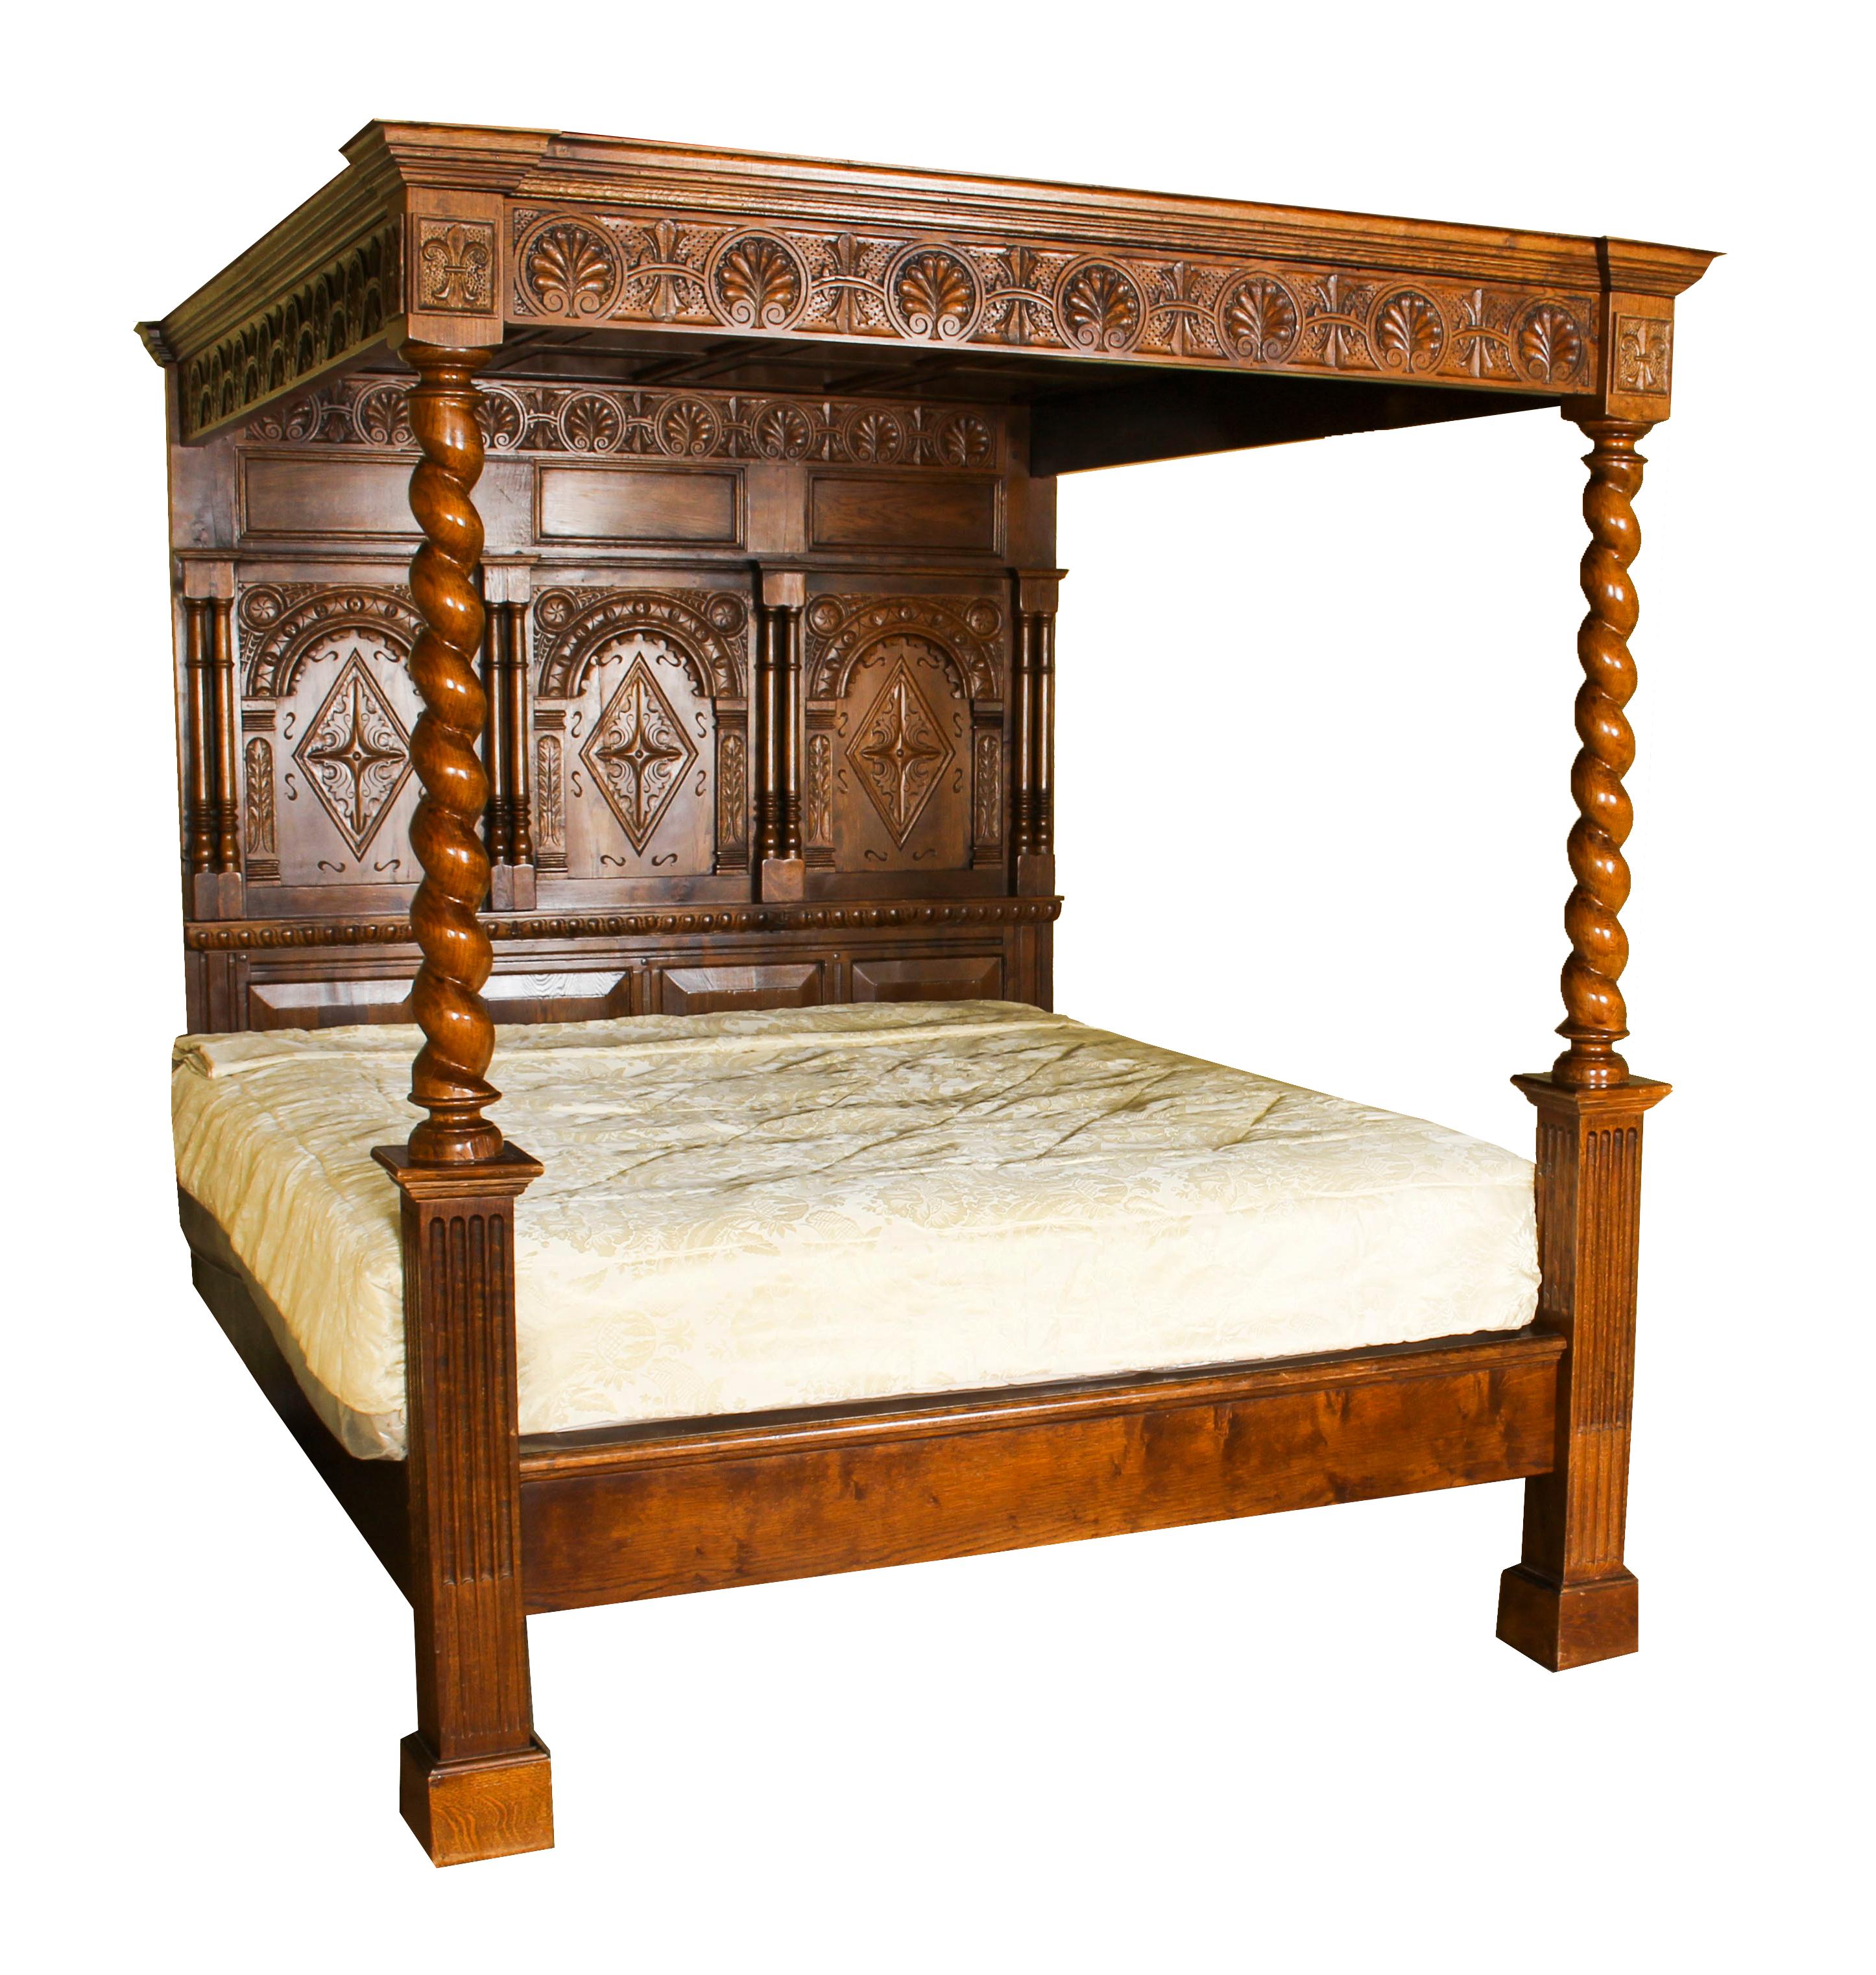 This is an exquisite vintage oak four poster bed with canopy, mid-20th century in date, with a pair of antique bedside cabinets. 

It has a beautiful headboard feature panels with carved crests, the two columns are carved in the form of barley twist